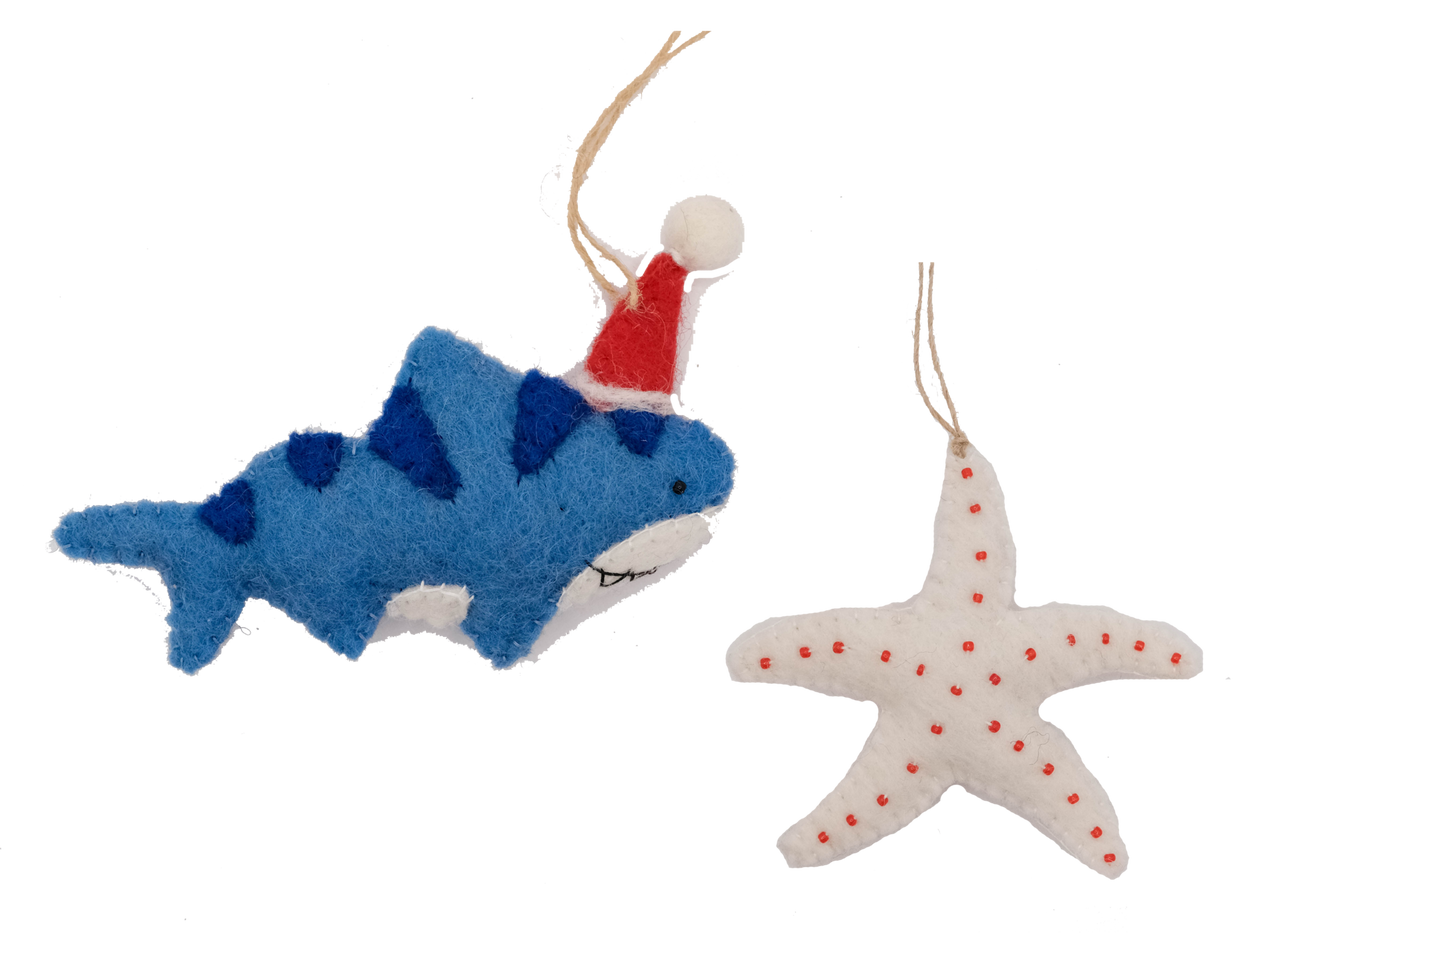 This Global Groove Life, handmade, ethical, fair trade, eco-friendly, sustainable, blue, white and red, felt Shark Santa with Starfish ornament set was created by artisans in Kathmandu Nepal and will be a beautiful addition to your Christmas tree this holiday season.